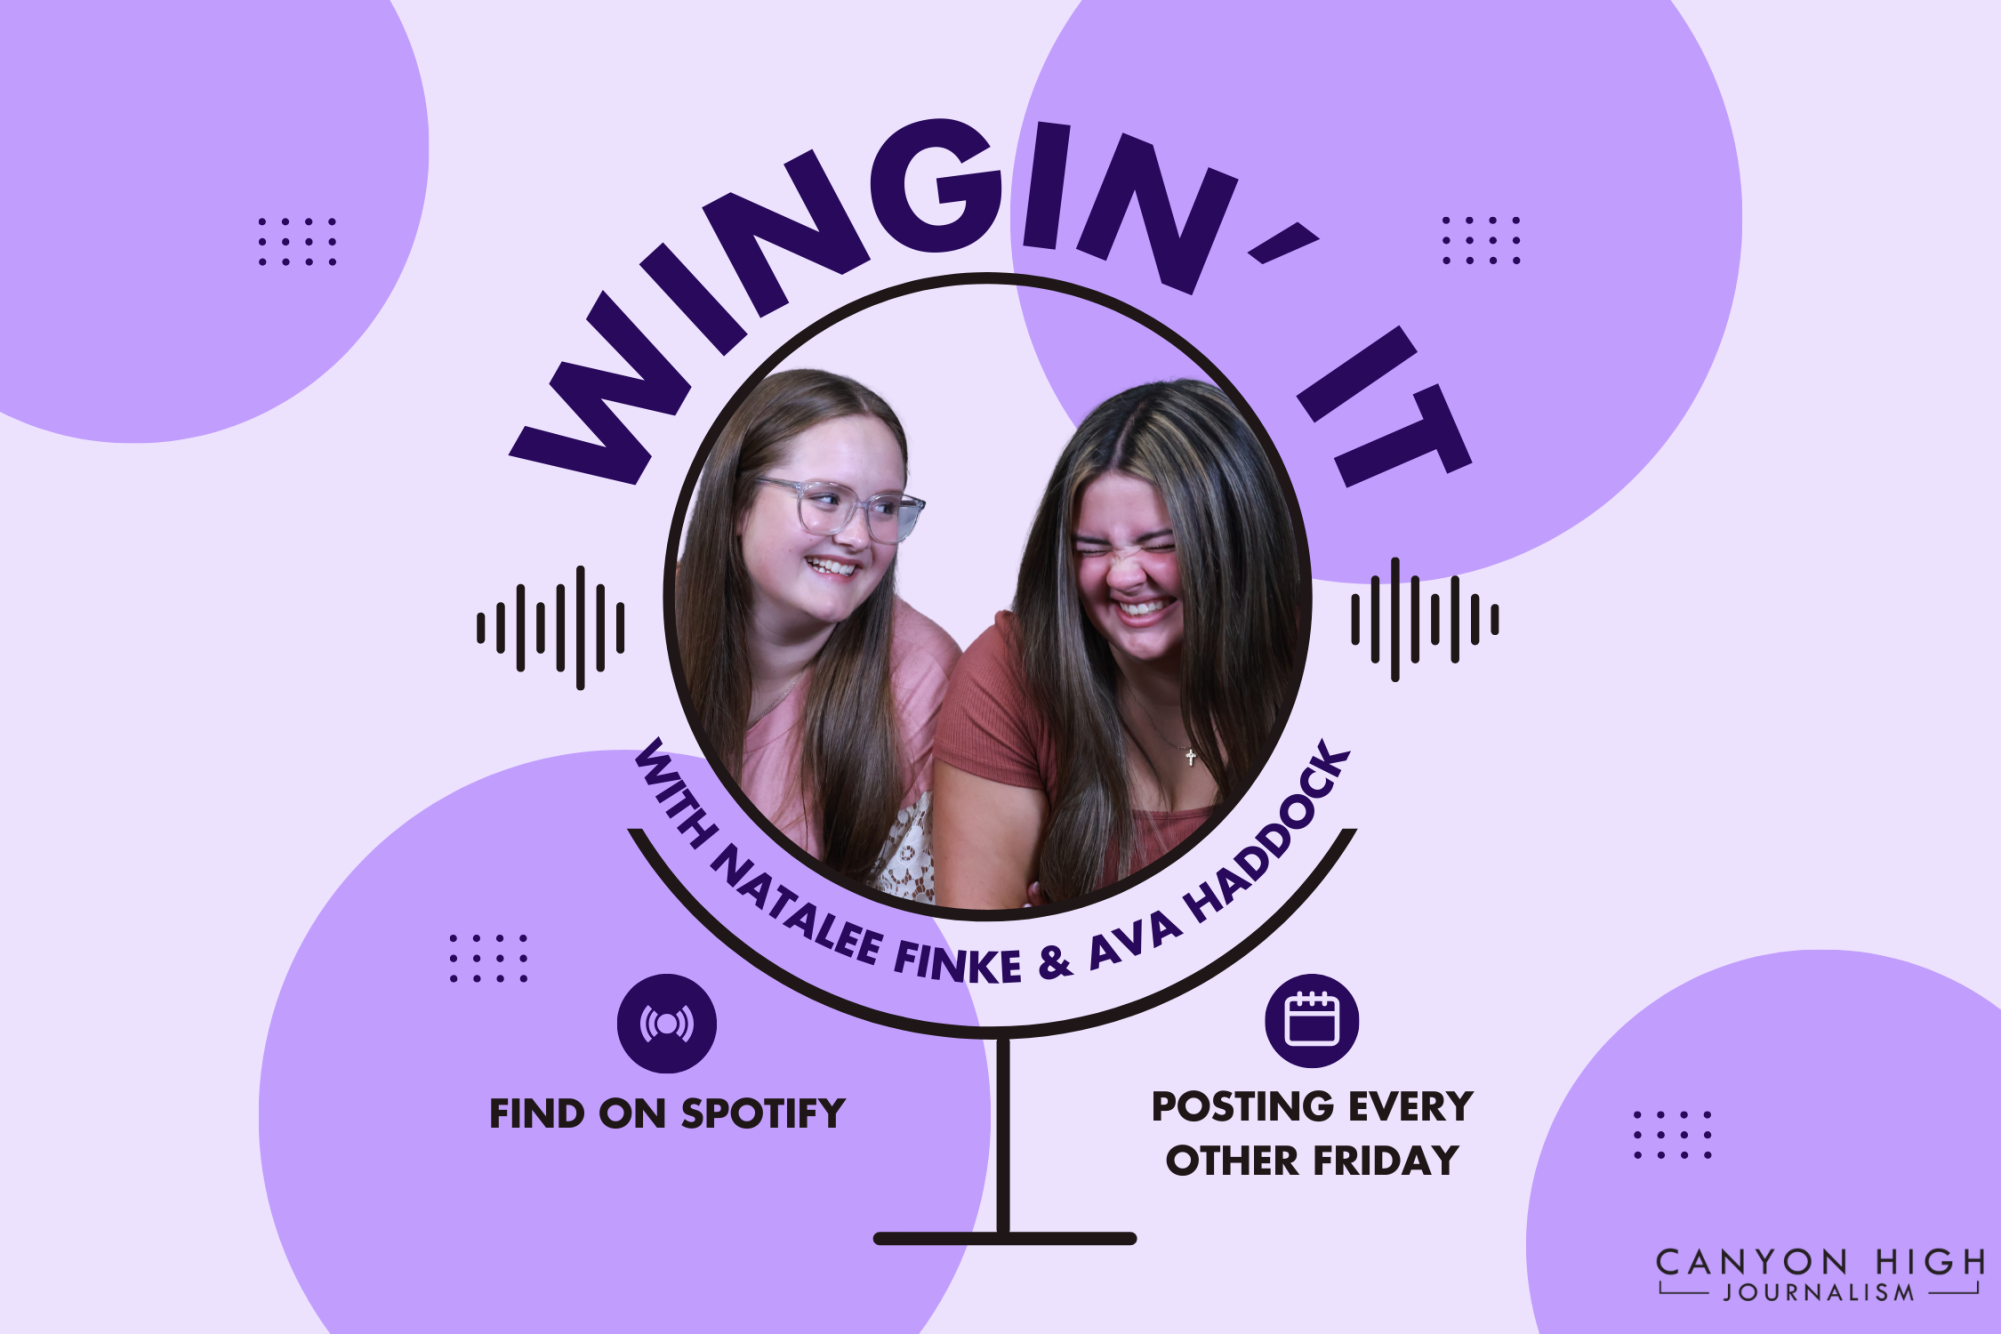 Winging It will be posting its first podcast tomorrow on Spotify. “Its gonna be fun,” podcast host Ava Haddock said. “We are going to try to make it really, really fun and enjoyable for everyone.”